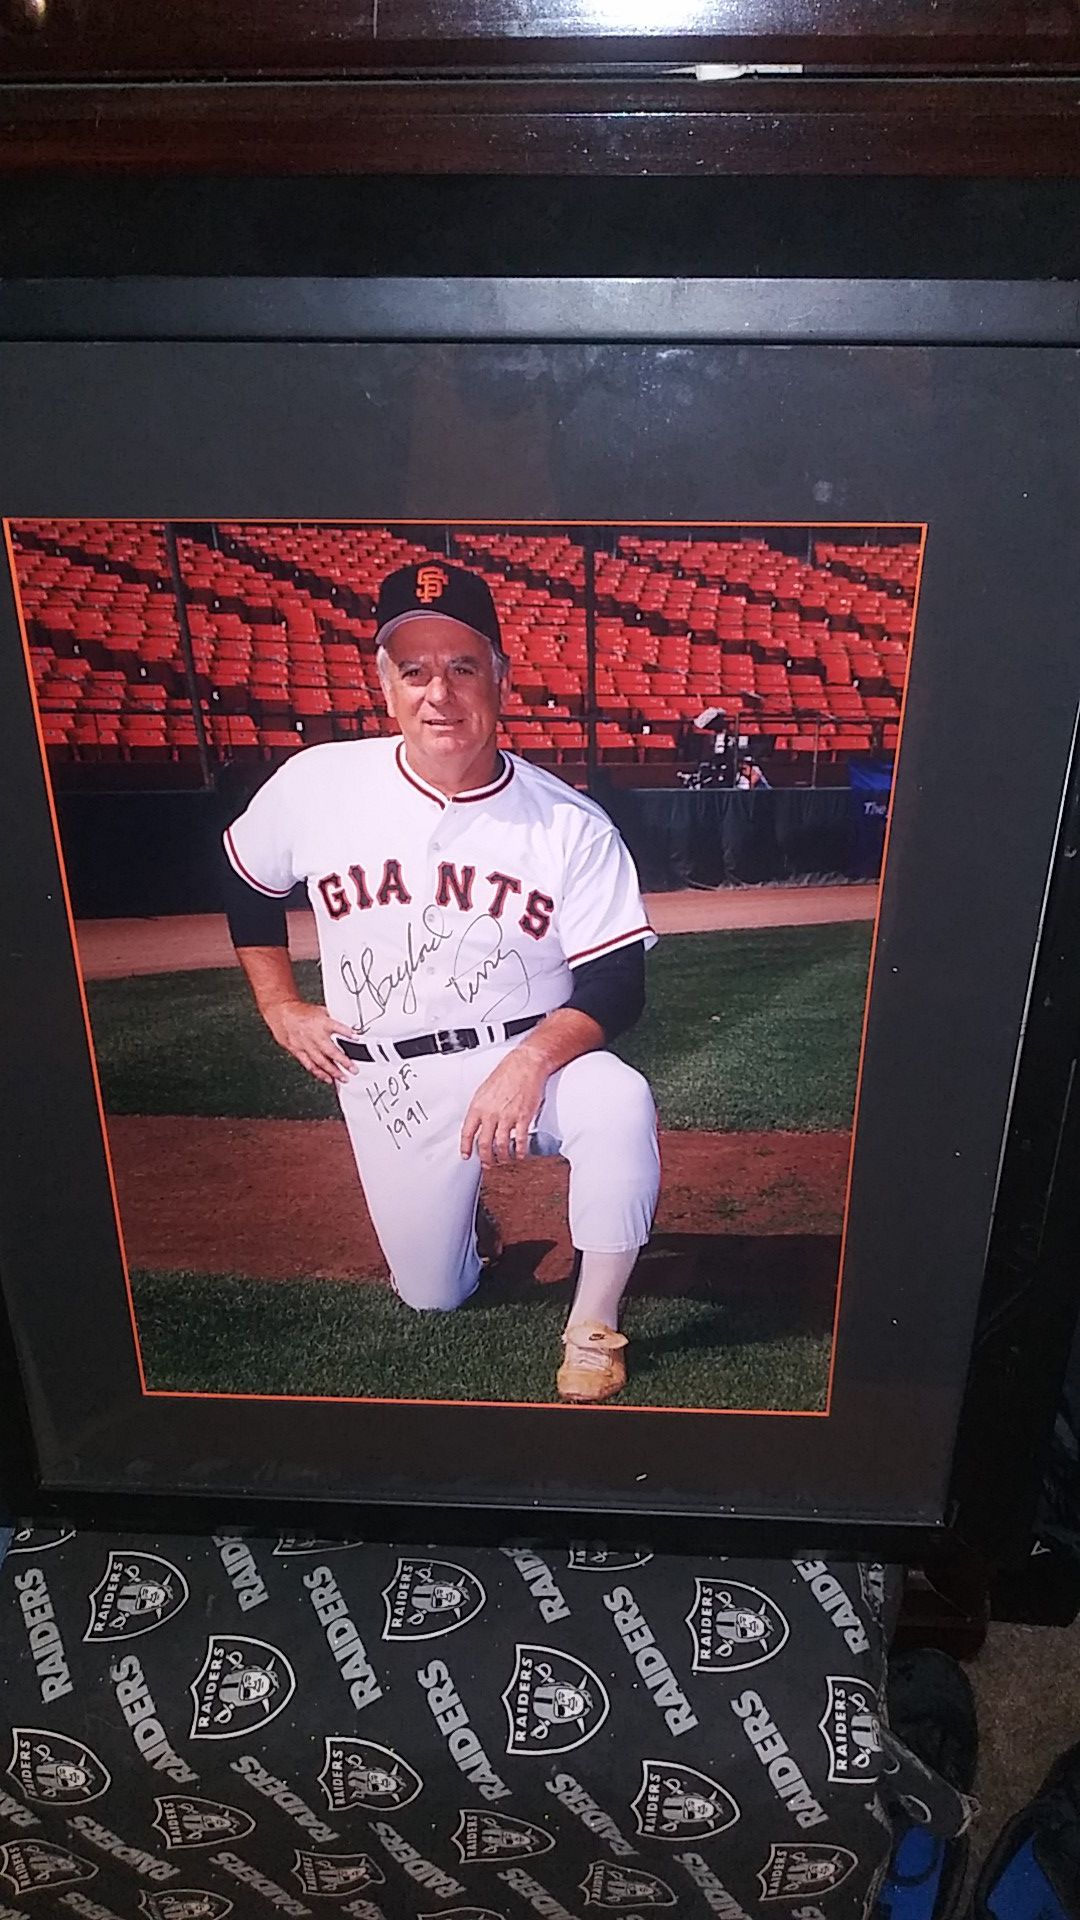 Giant's signed picture